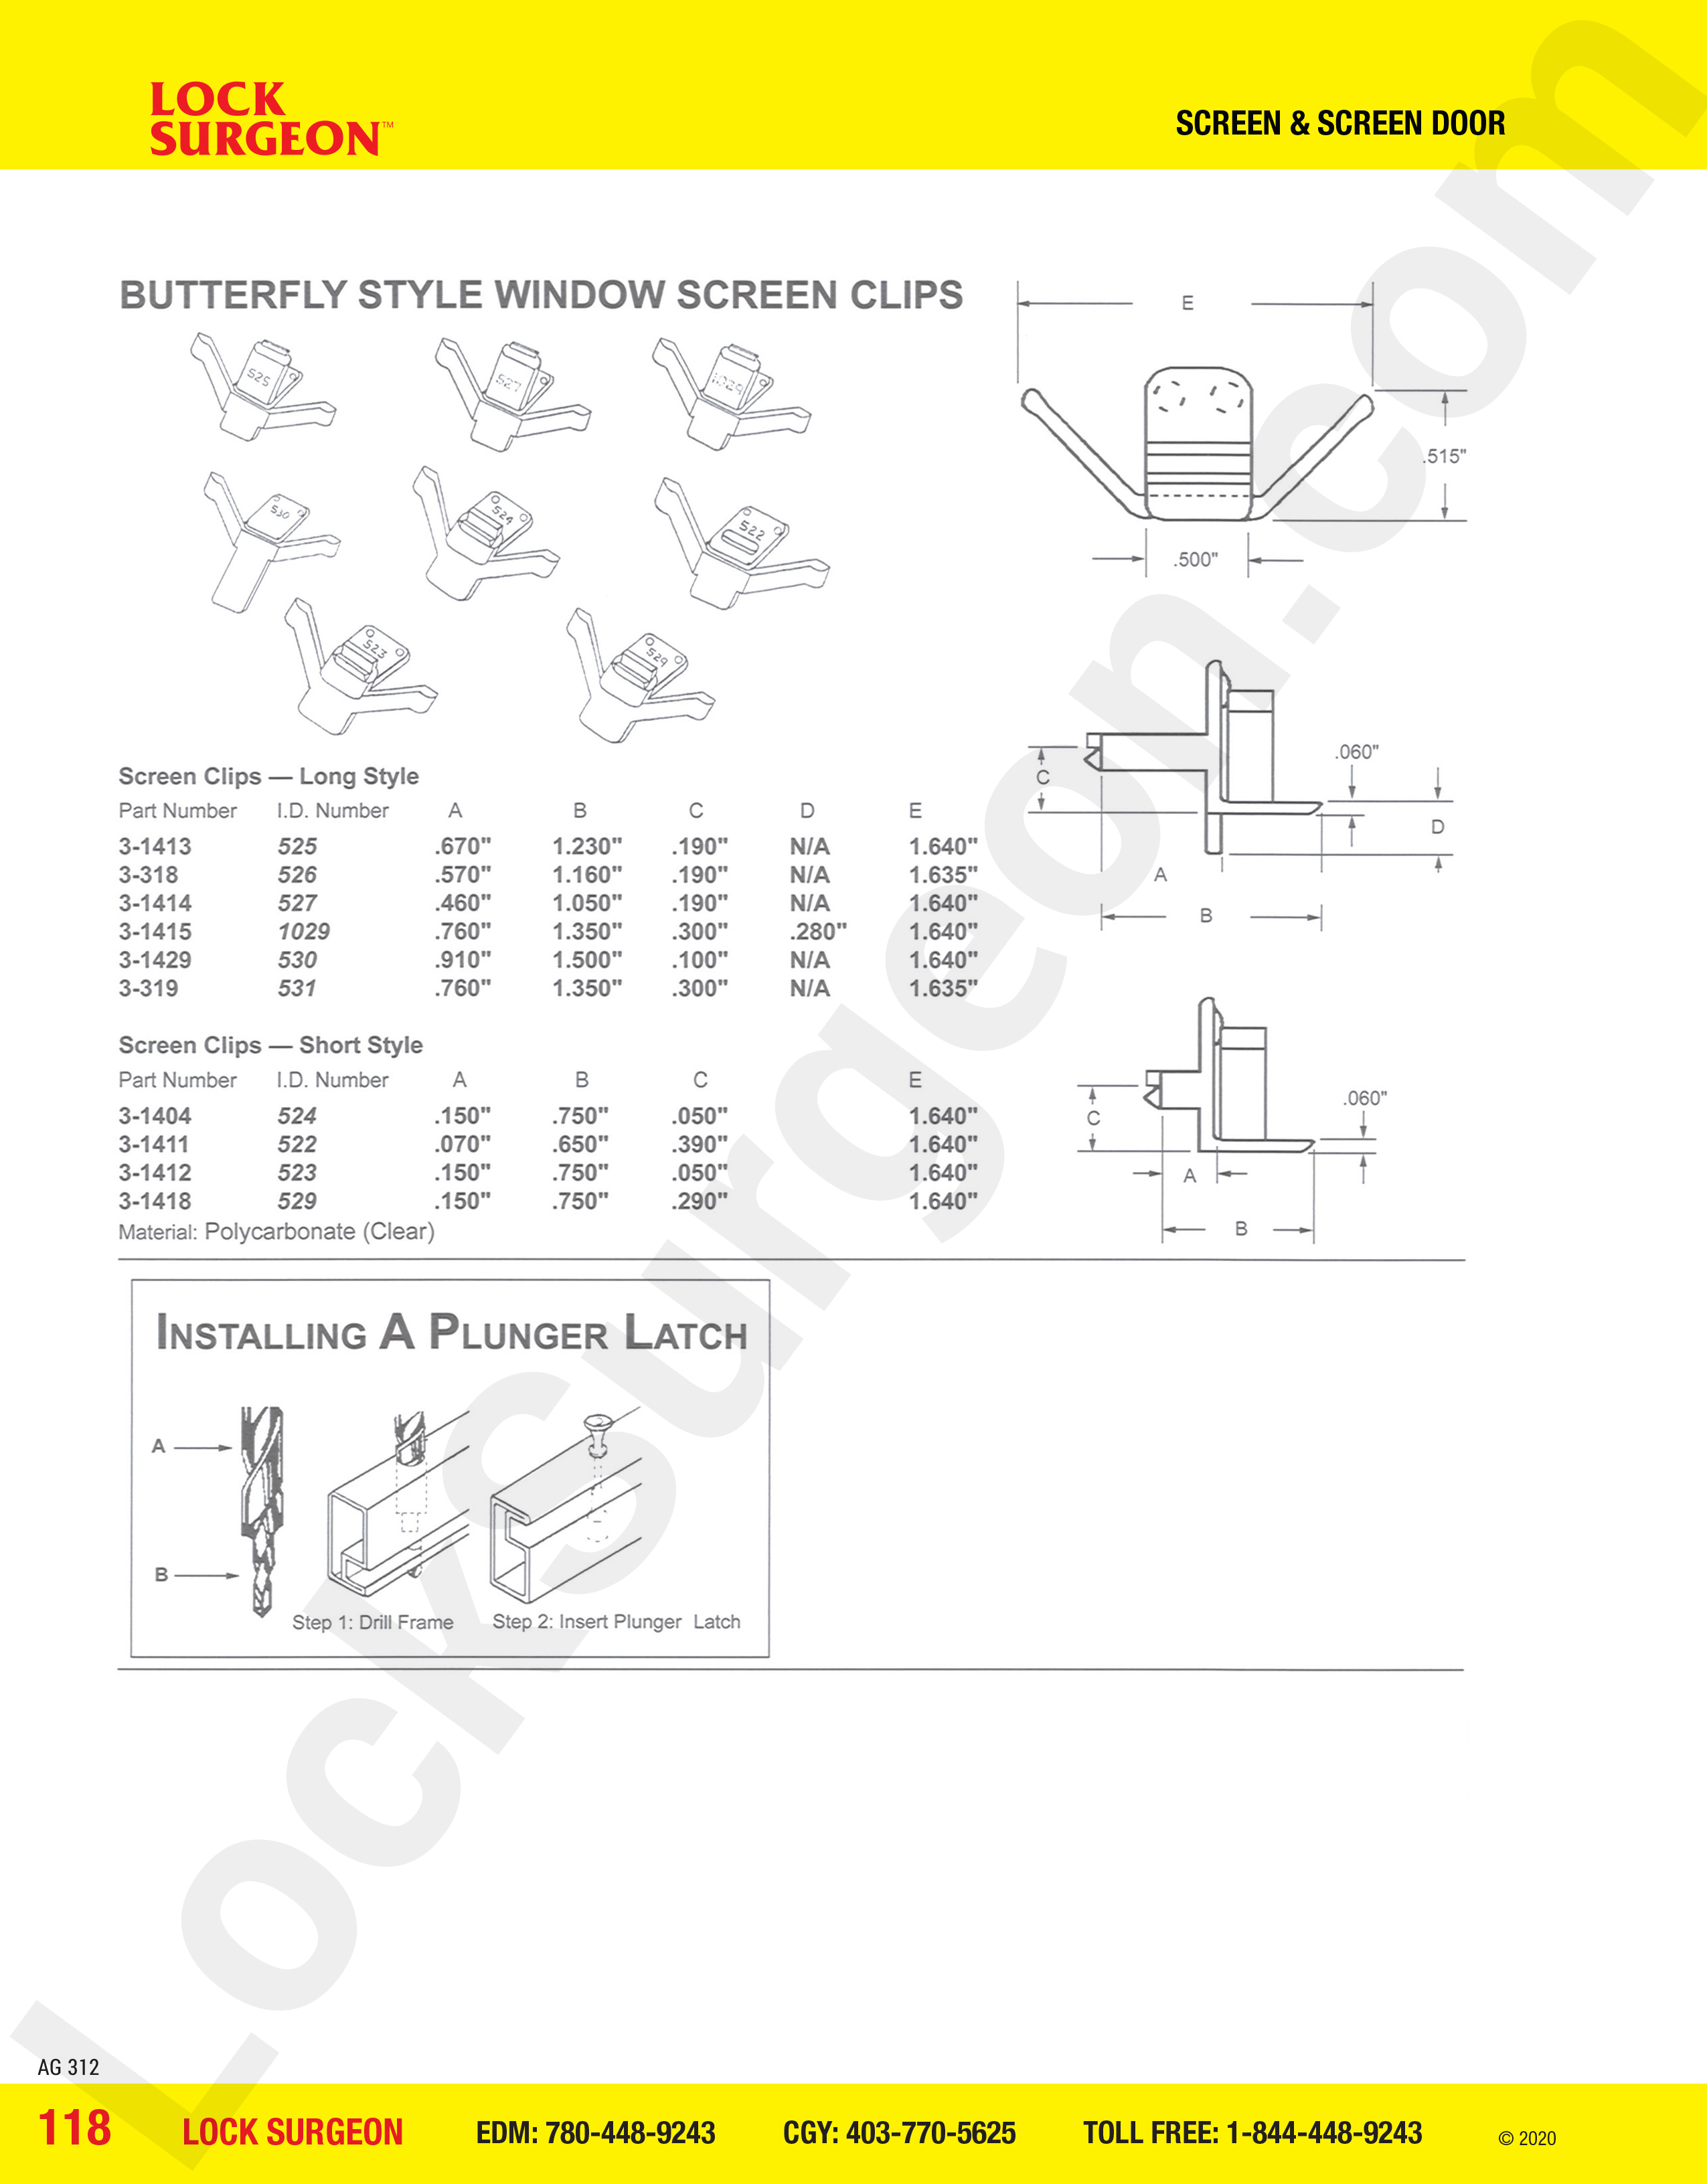 Screen and Screen Door clips - butterfly style